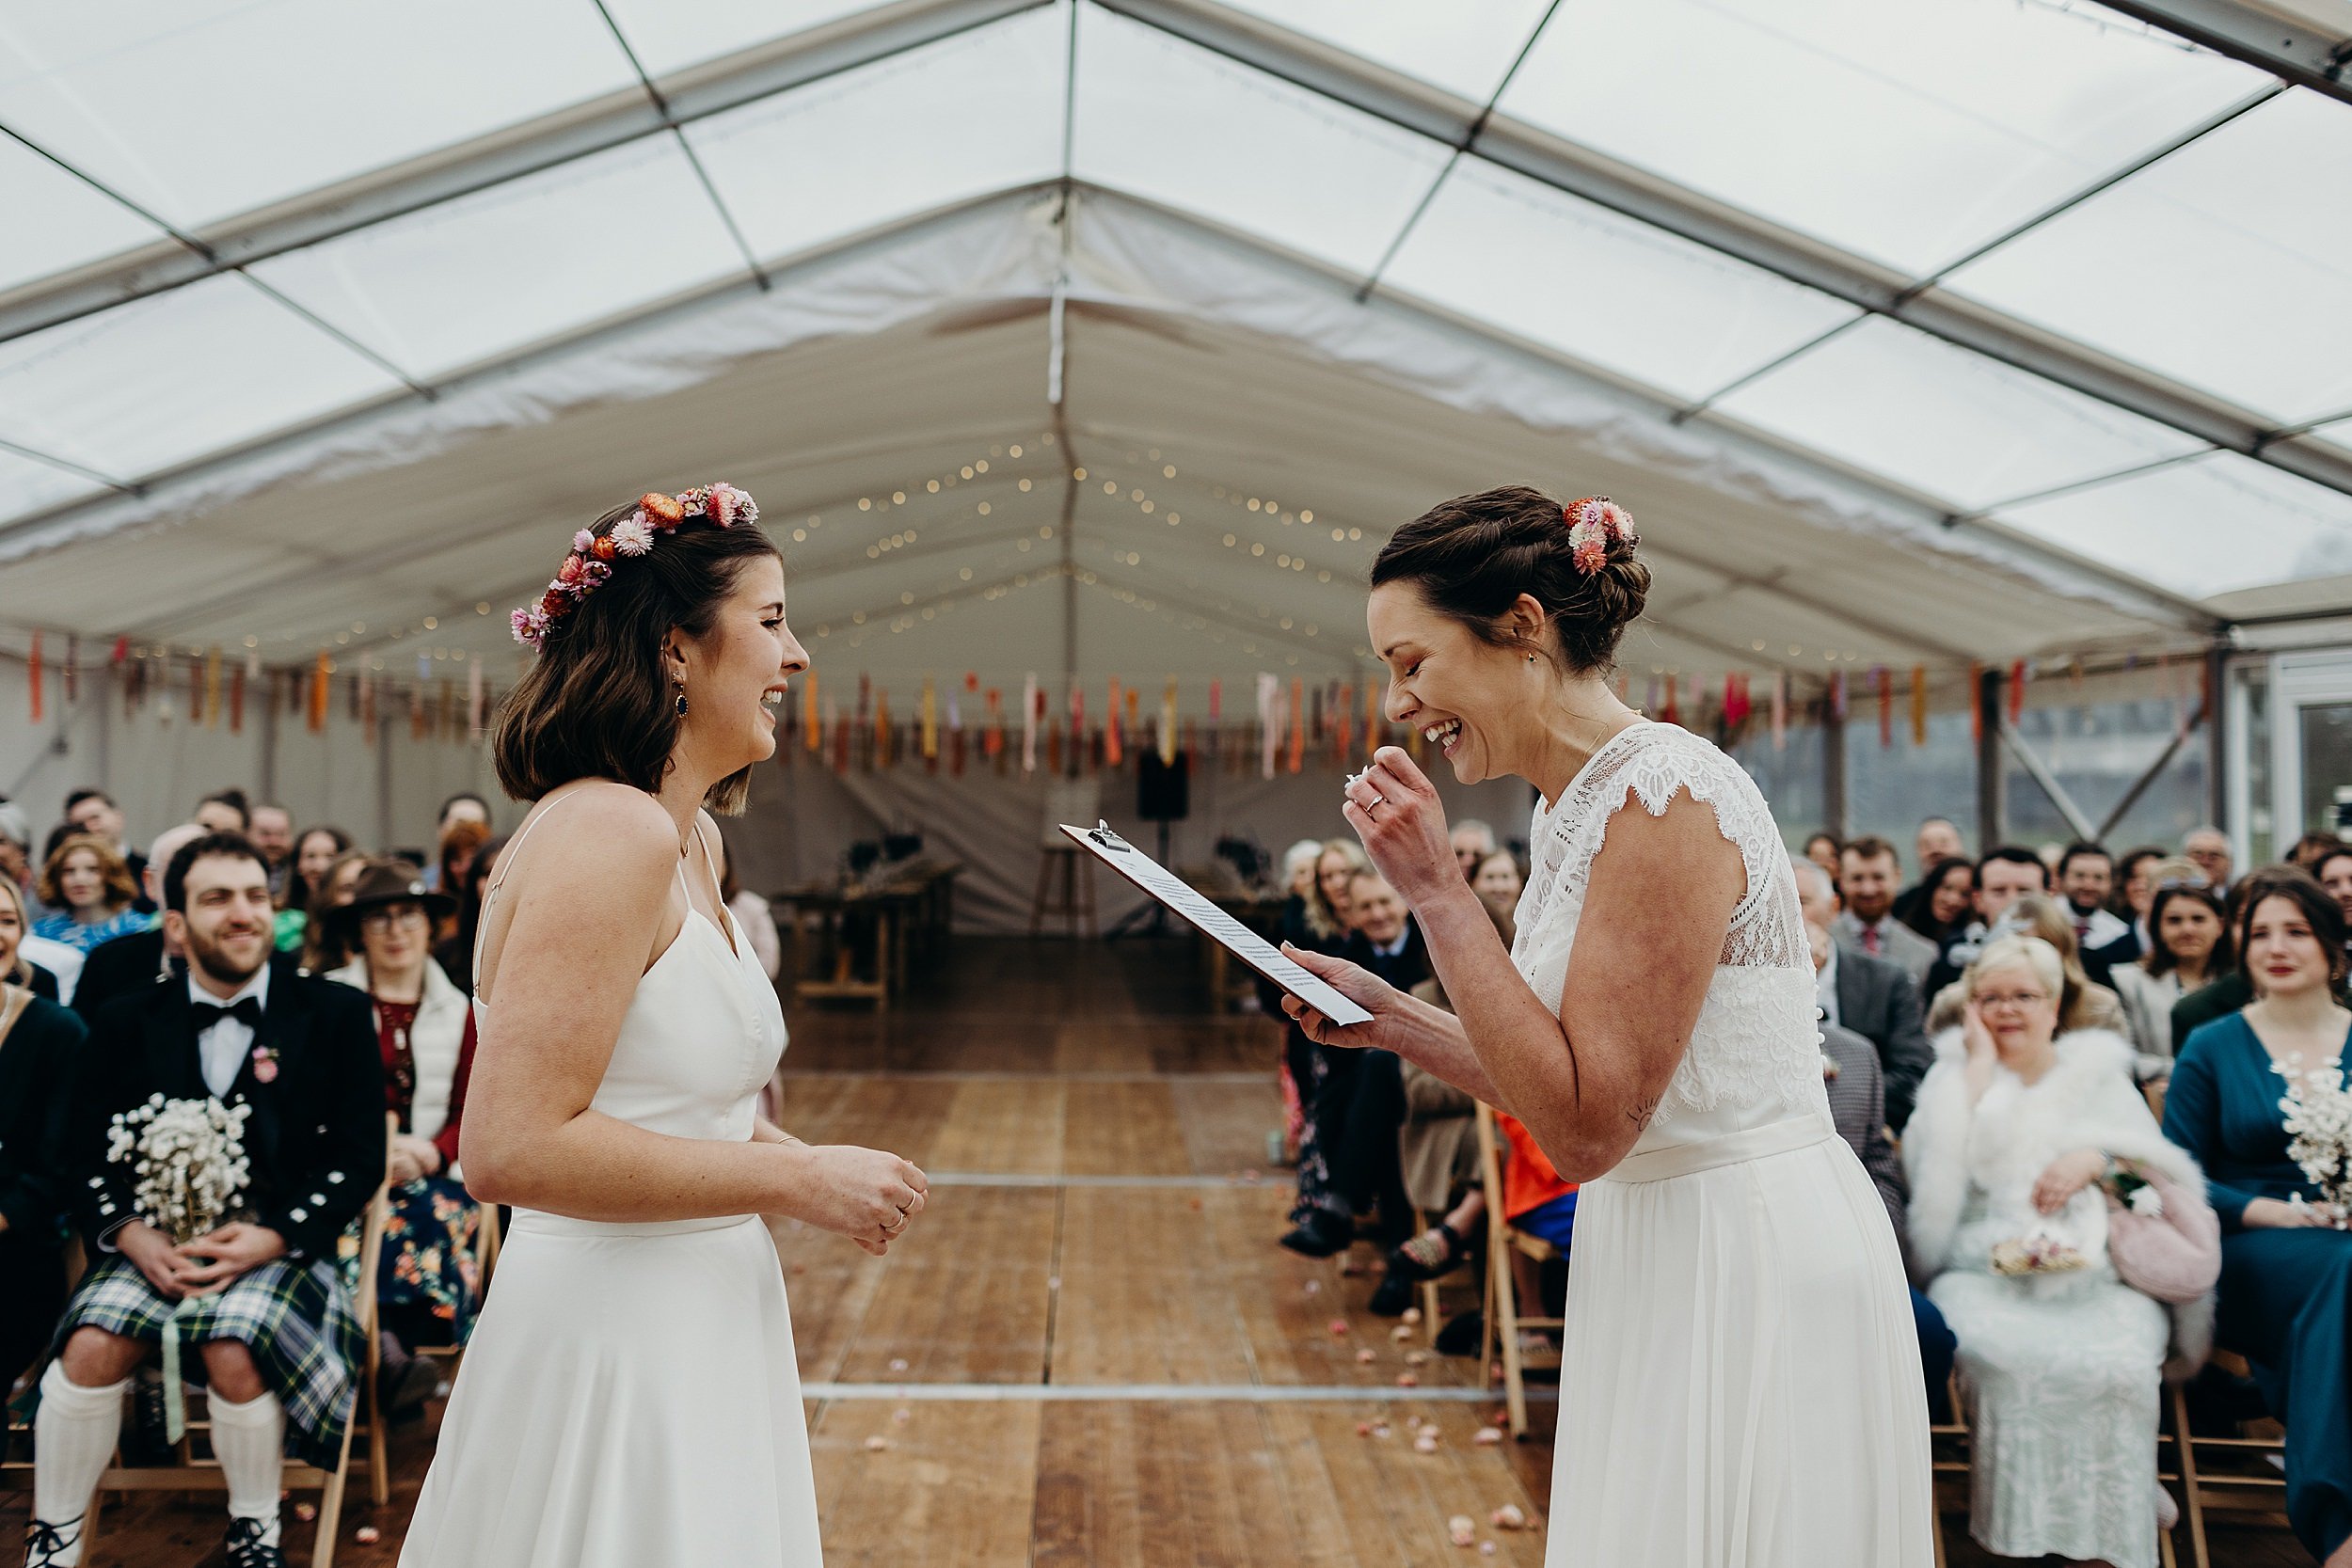 one bride reads as the other listens during their harvest moon wedding inside a white marquee as seated guests look on beneath festoon lights and ribbon garlands